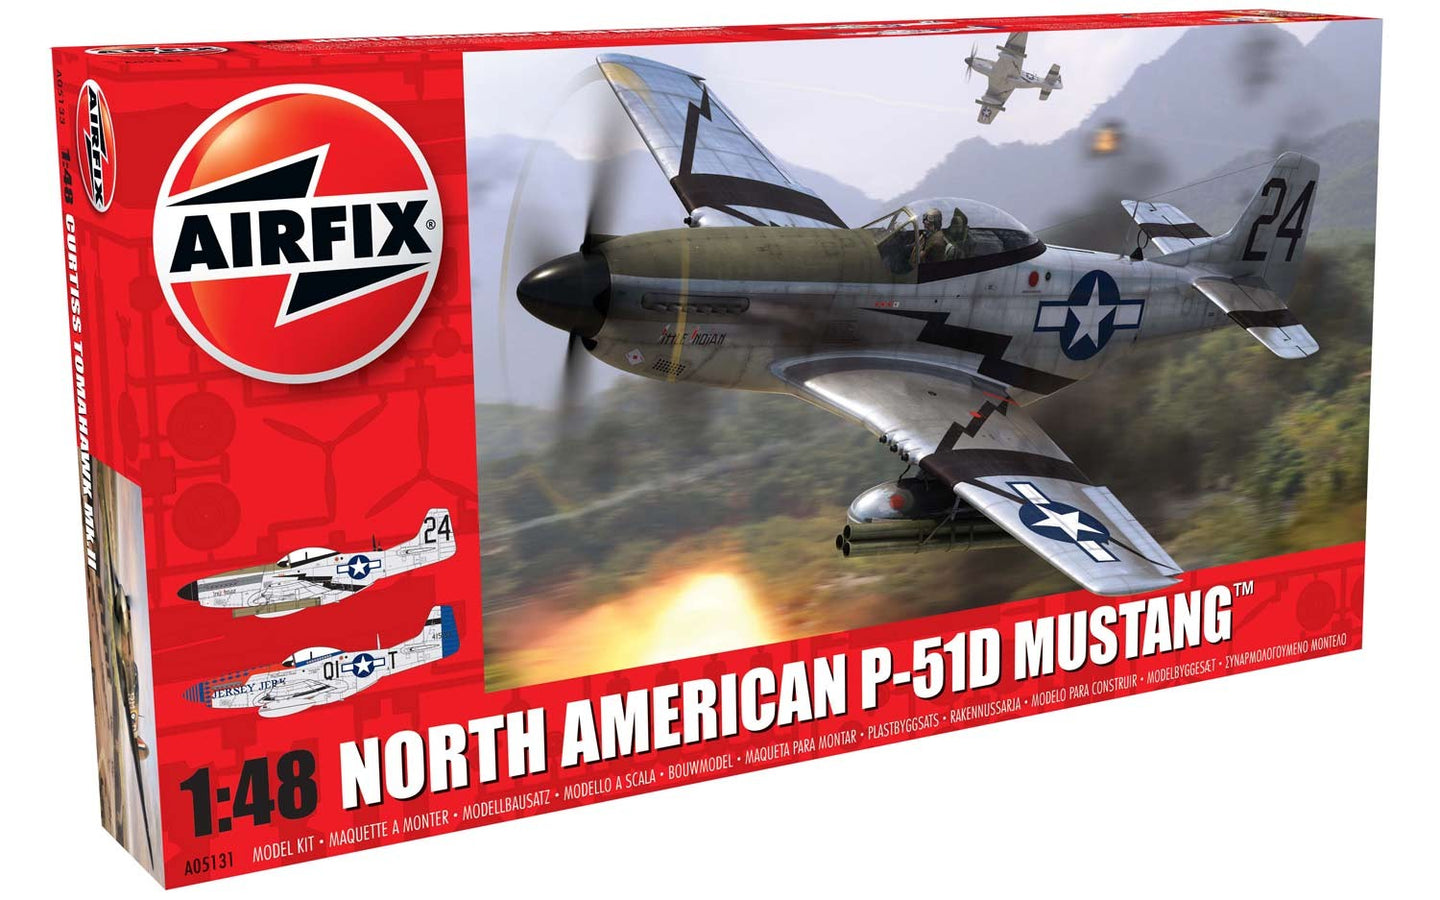 Airfix 1/48 US North American P-51D Mustang A05131